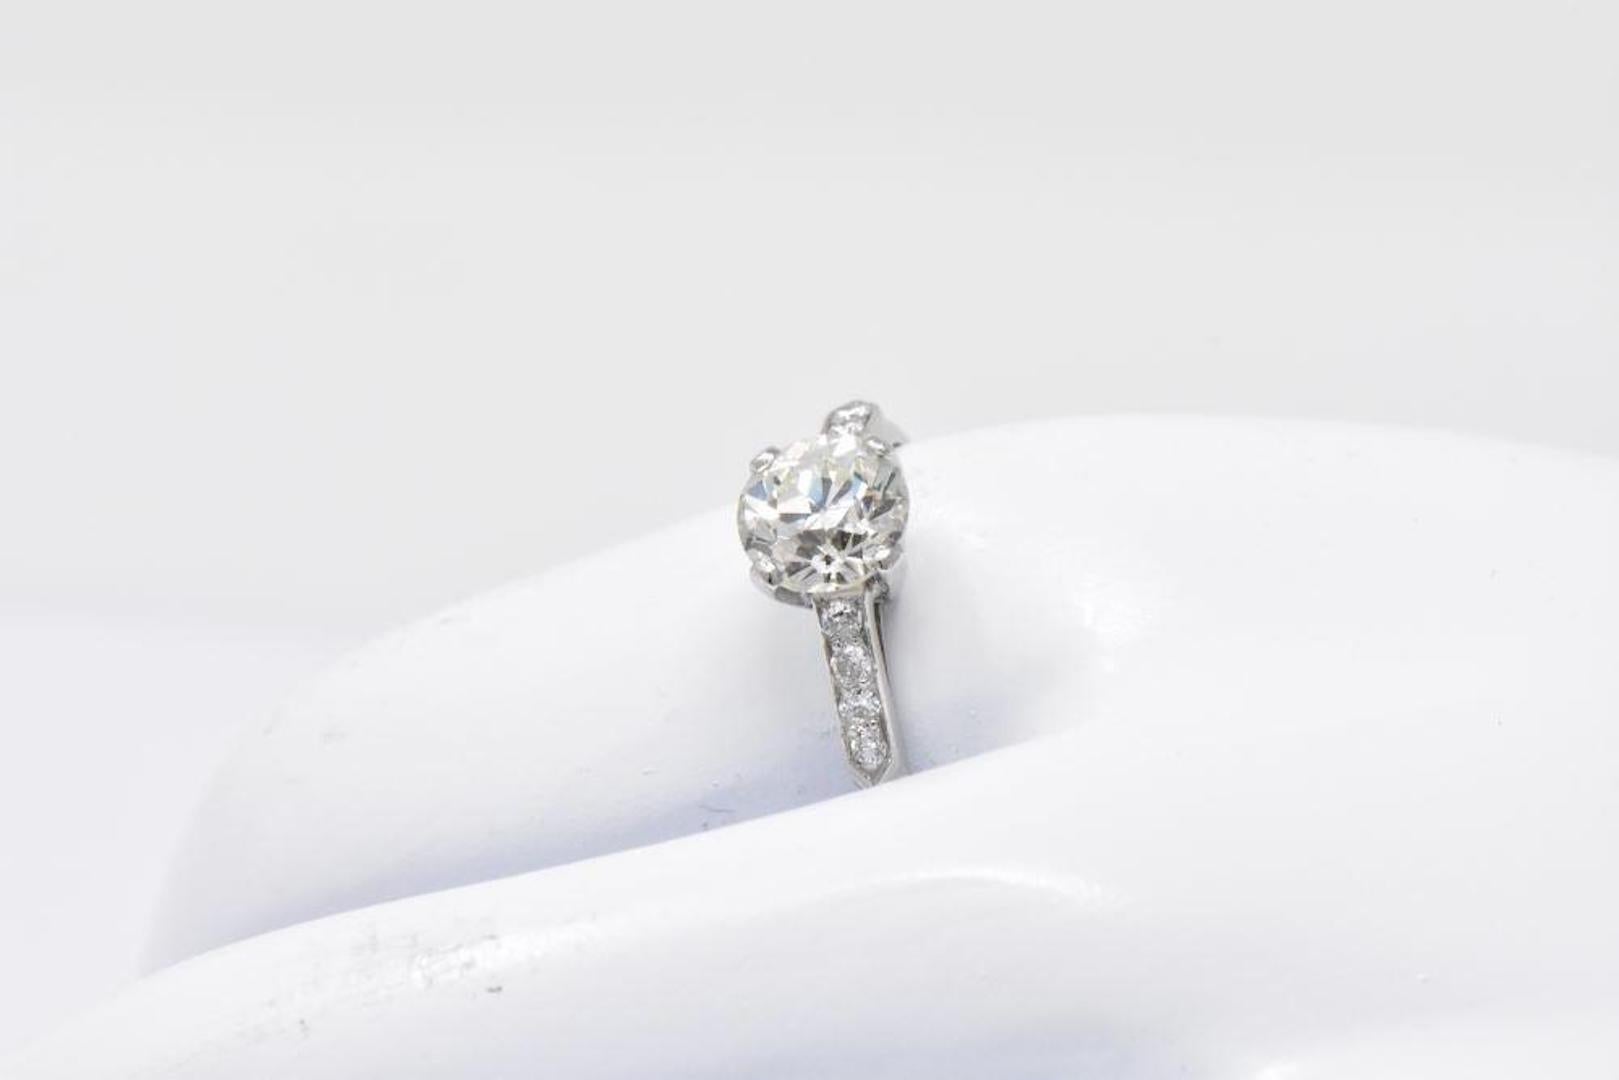 Centering a basket set old European cut diamond weighing 1.37 carats, L color with SI1 clarity

Flanked by round brilliant cut diamonds, bead set in a pointed shoulder motif, weighing approximately 0.12 carat total; eye-clean and white

Completed by